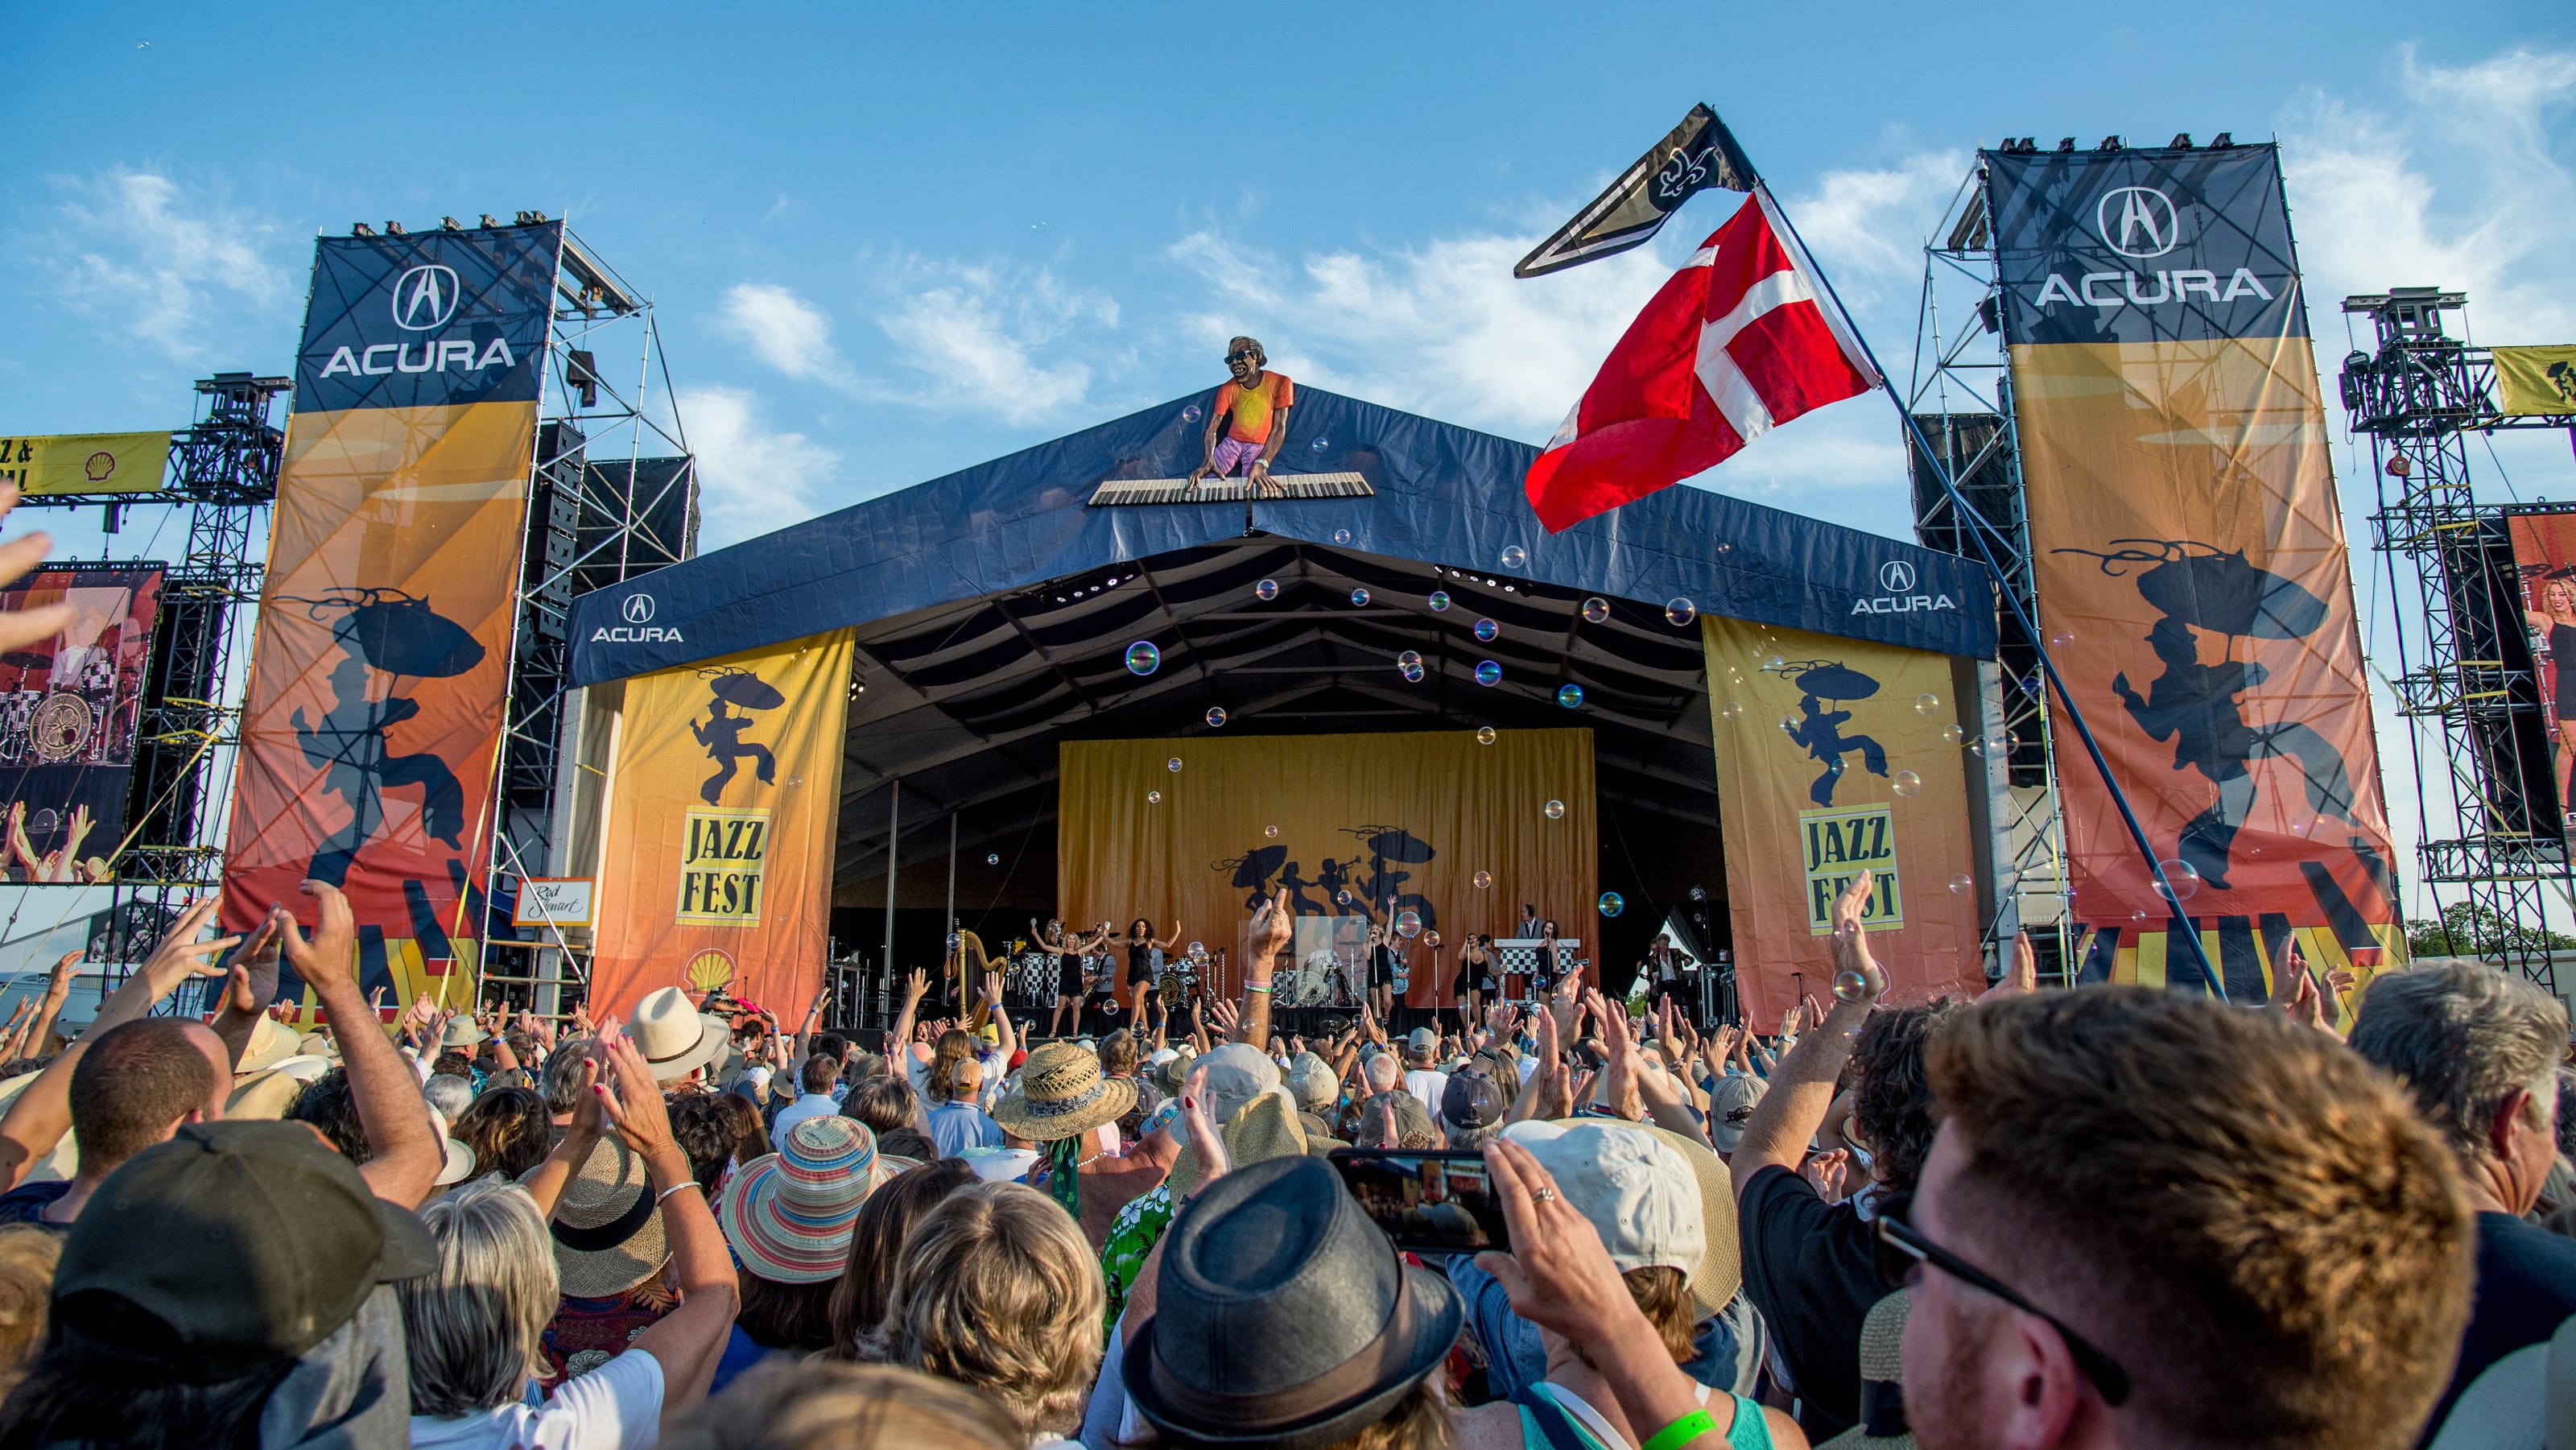 New Orleans Jazz Fest 2021 Event will now take place in October